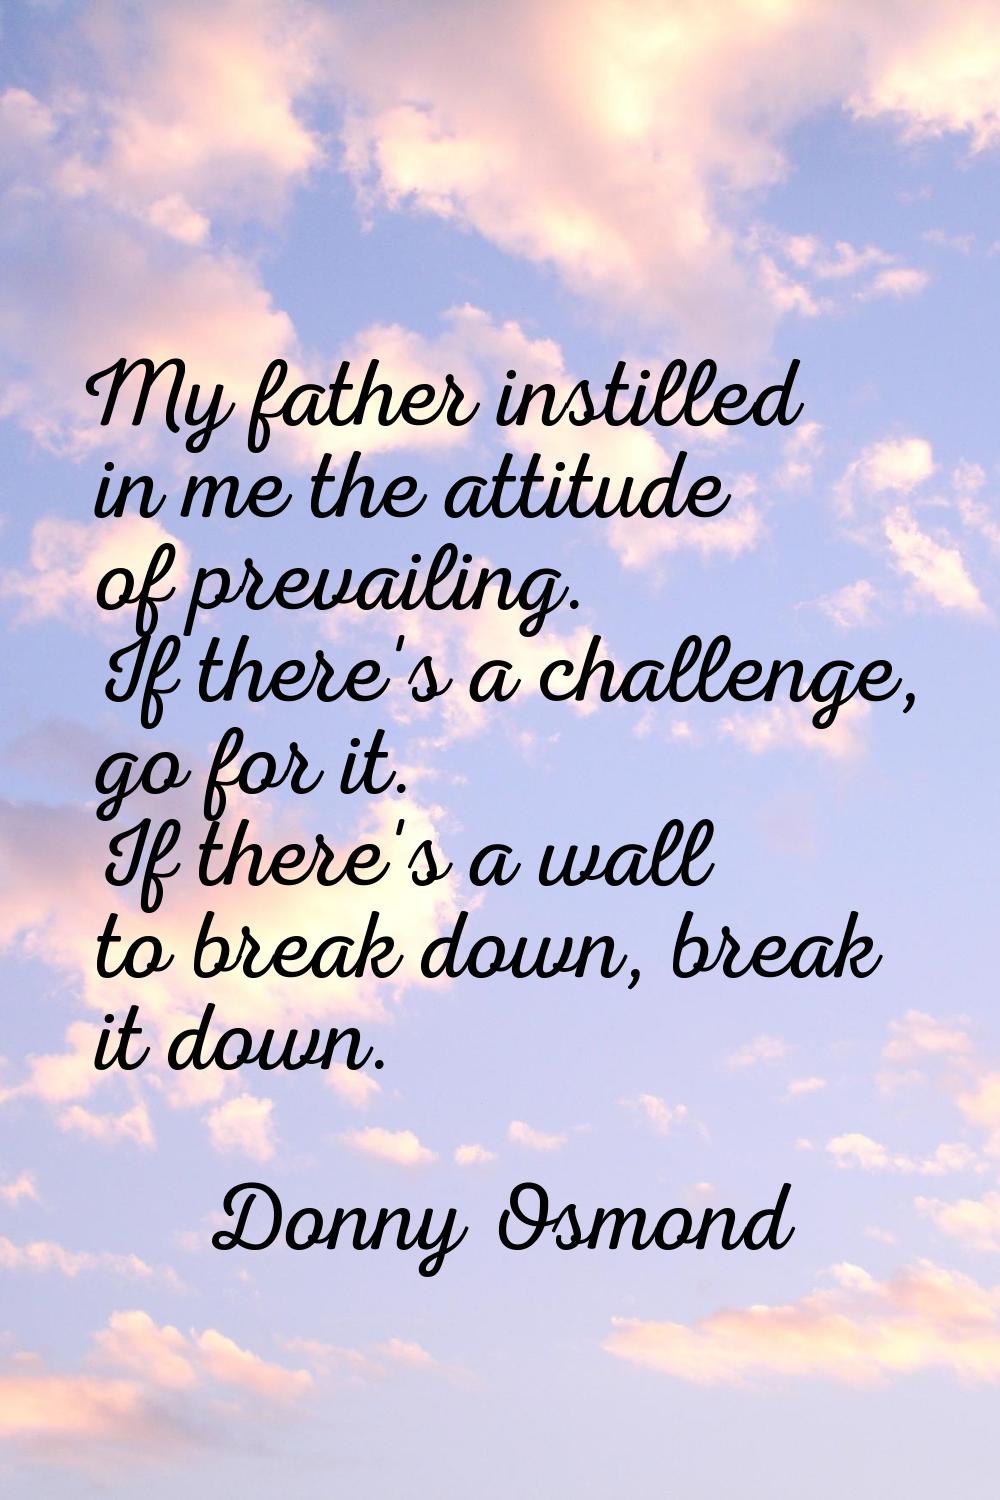 My father instilled in me the attitude of prevailing. If there's a challenge, go for it. If there's